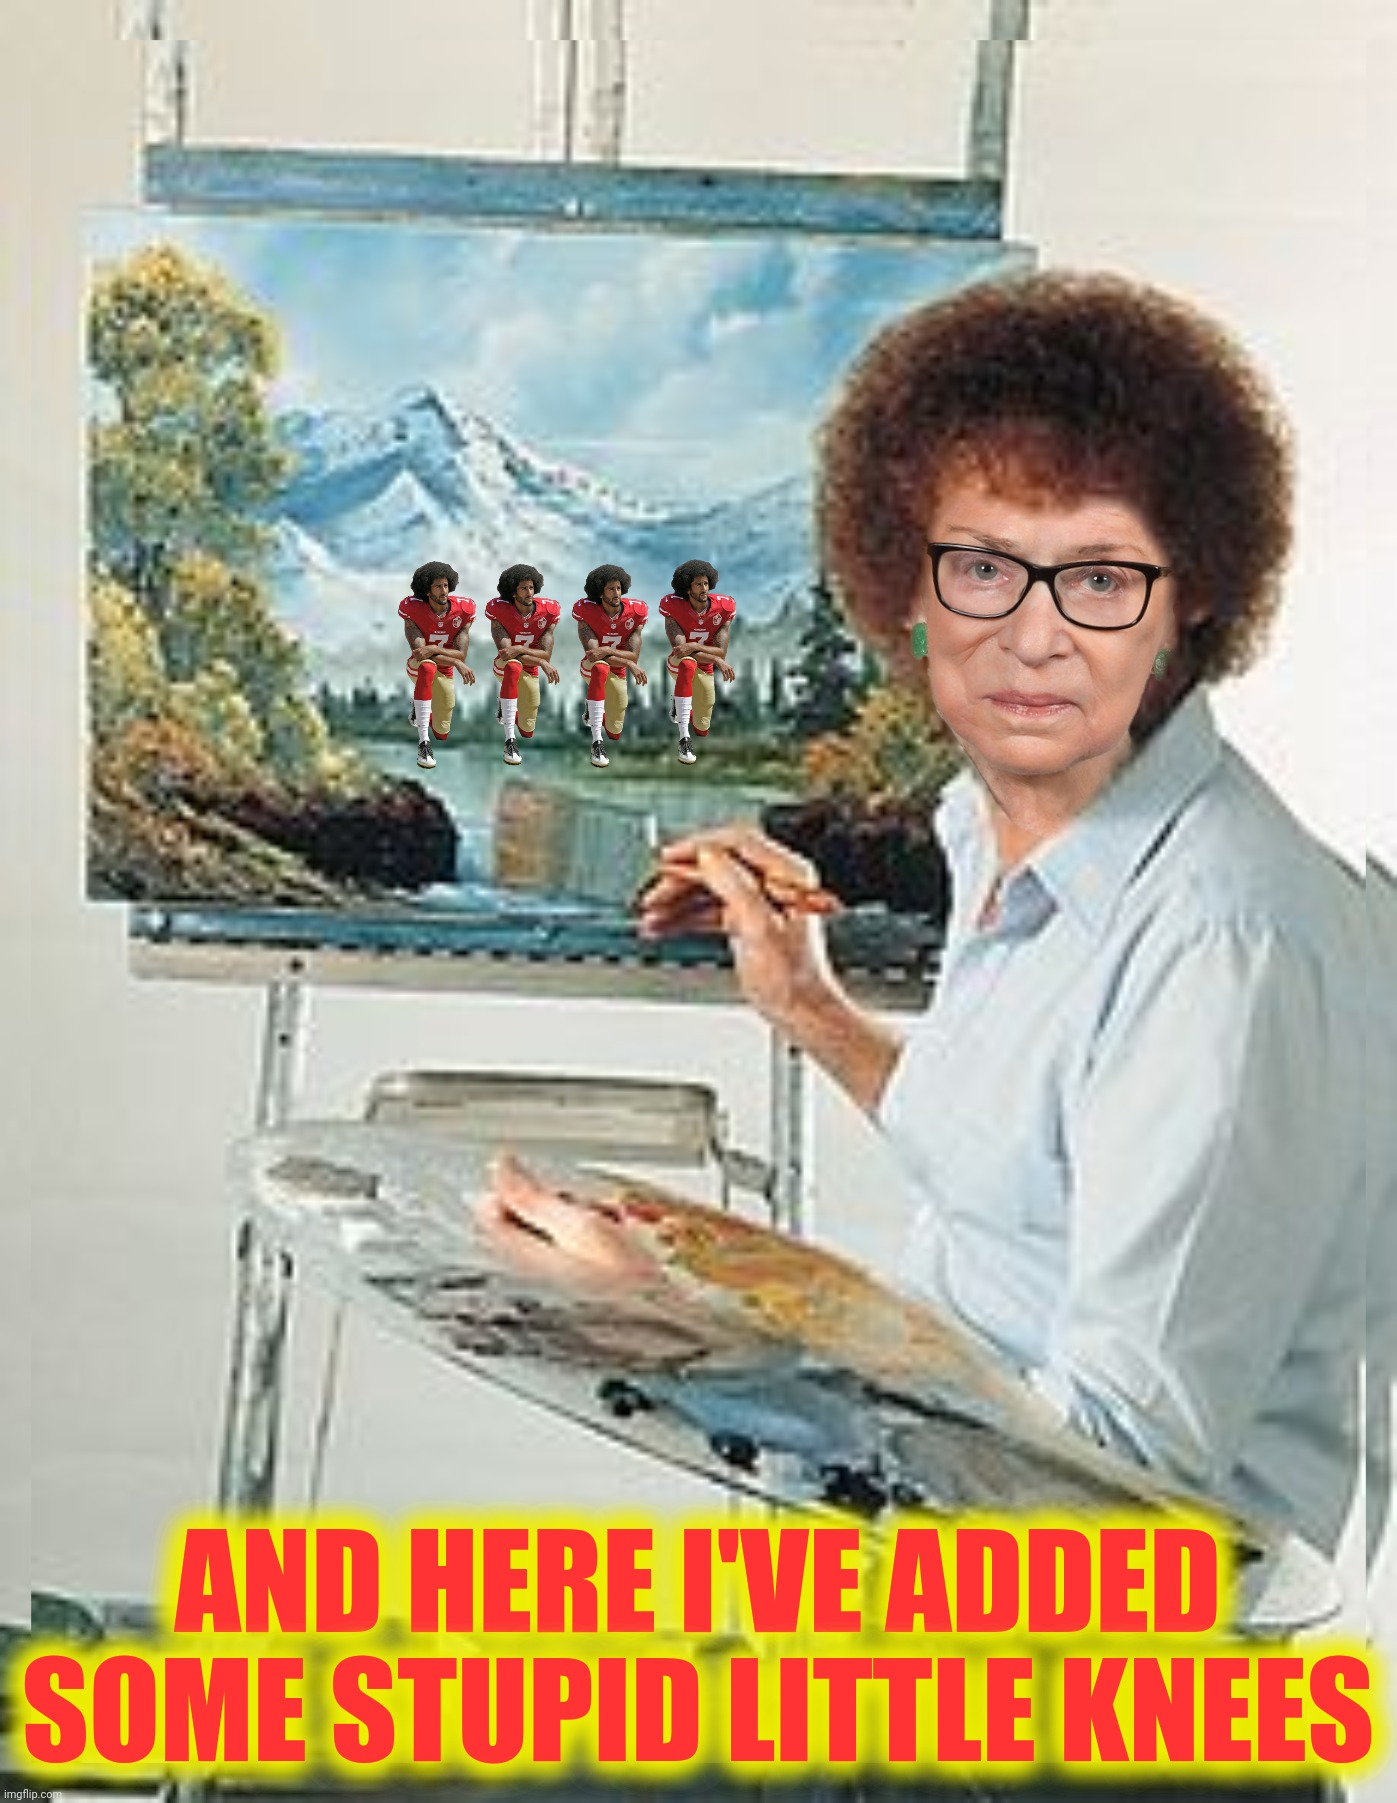 Ross Bader Ginsburg |  AND HERE I'VE ADDED SOME STUPID LITTLE KNEES | image tagged in bad photoshop,bob ross,ruth bader ginsburg,colin kaepernick,stupid | made w/ Imgflip meme maker